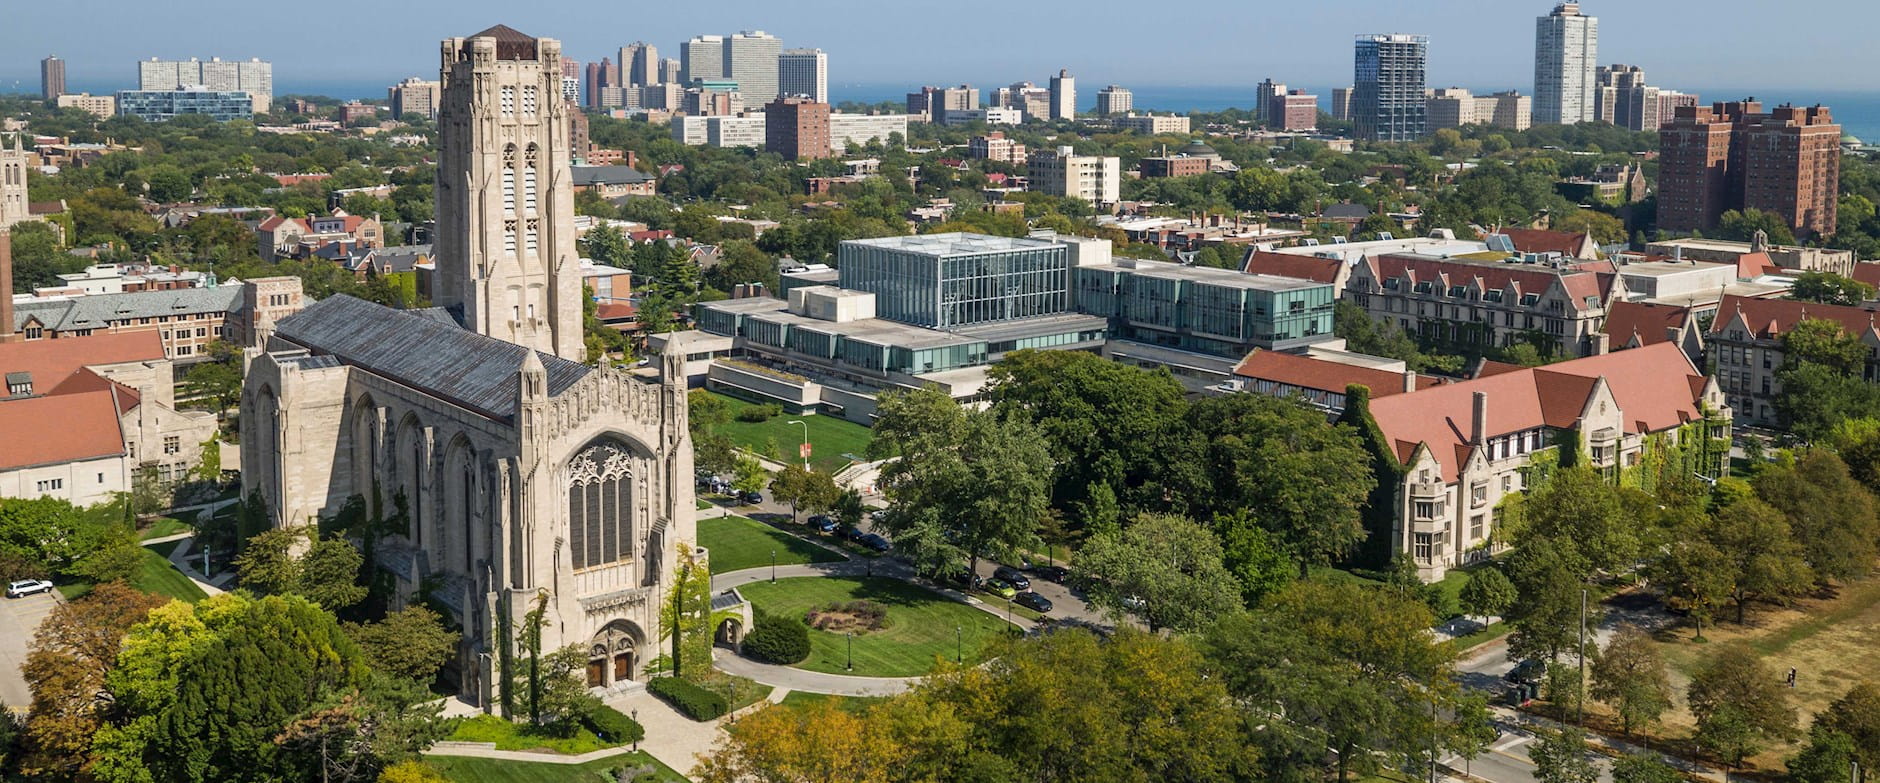 Europe  The University of Chicago Booth School of Business